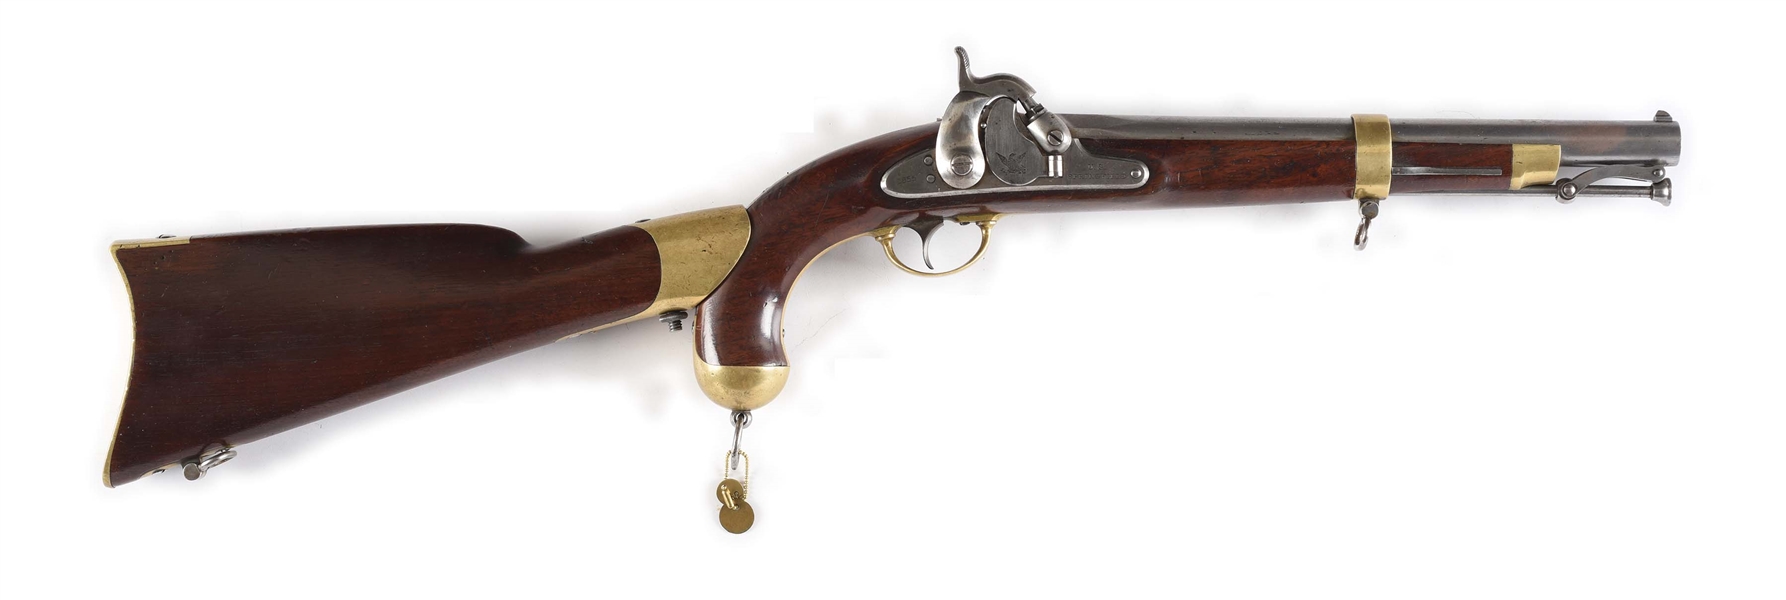 (A) FINE U.S. MODEL 1855 MAYNARD-PRIMED PERCUSSION PISTOL-CARBINE BY SPRINGFIELD, WITH ORIGINAL STOCK